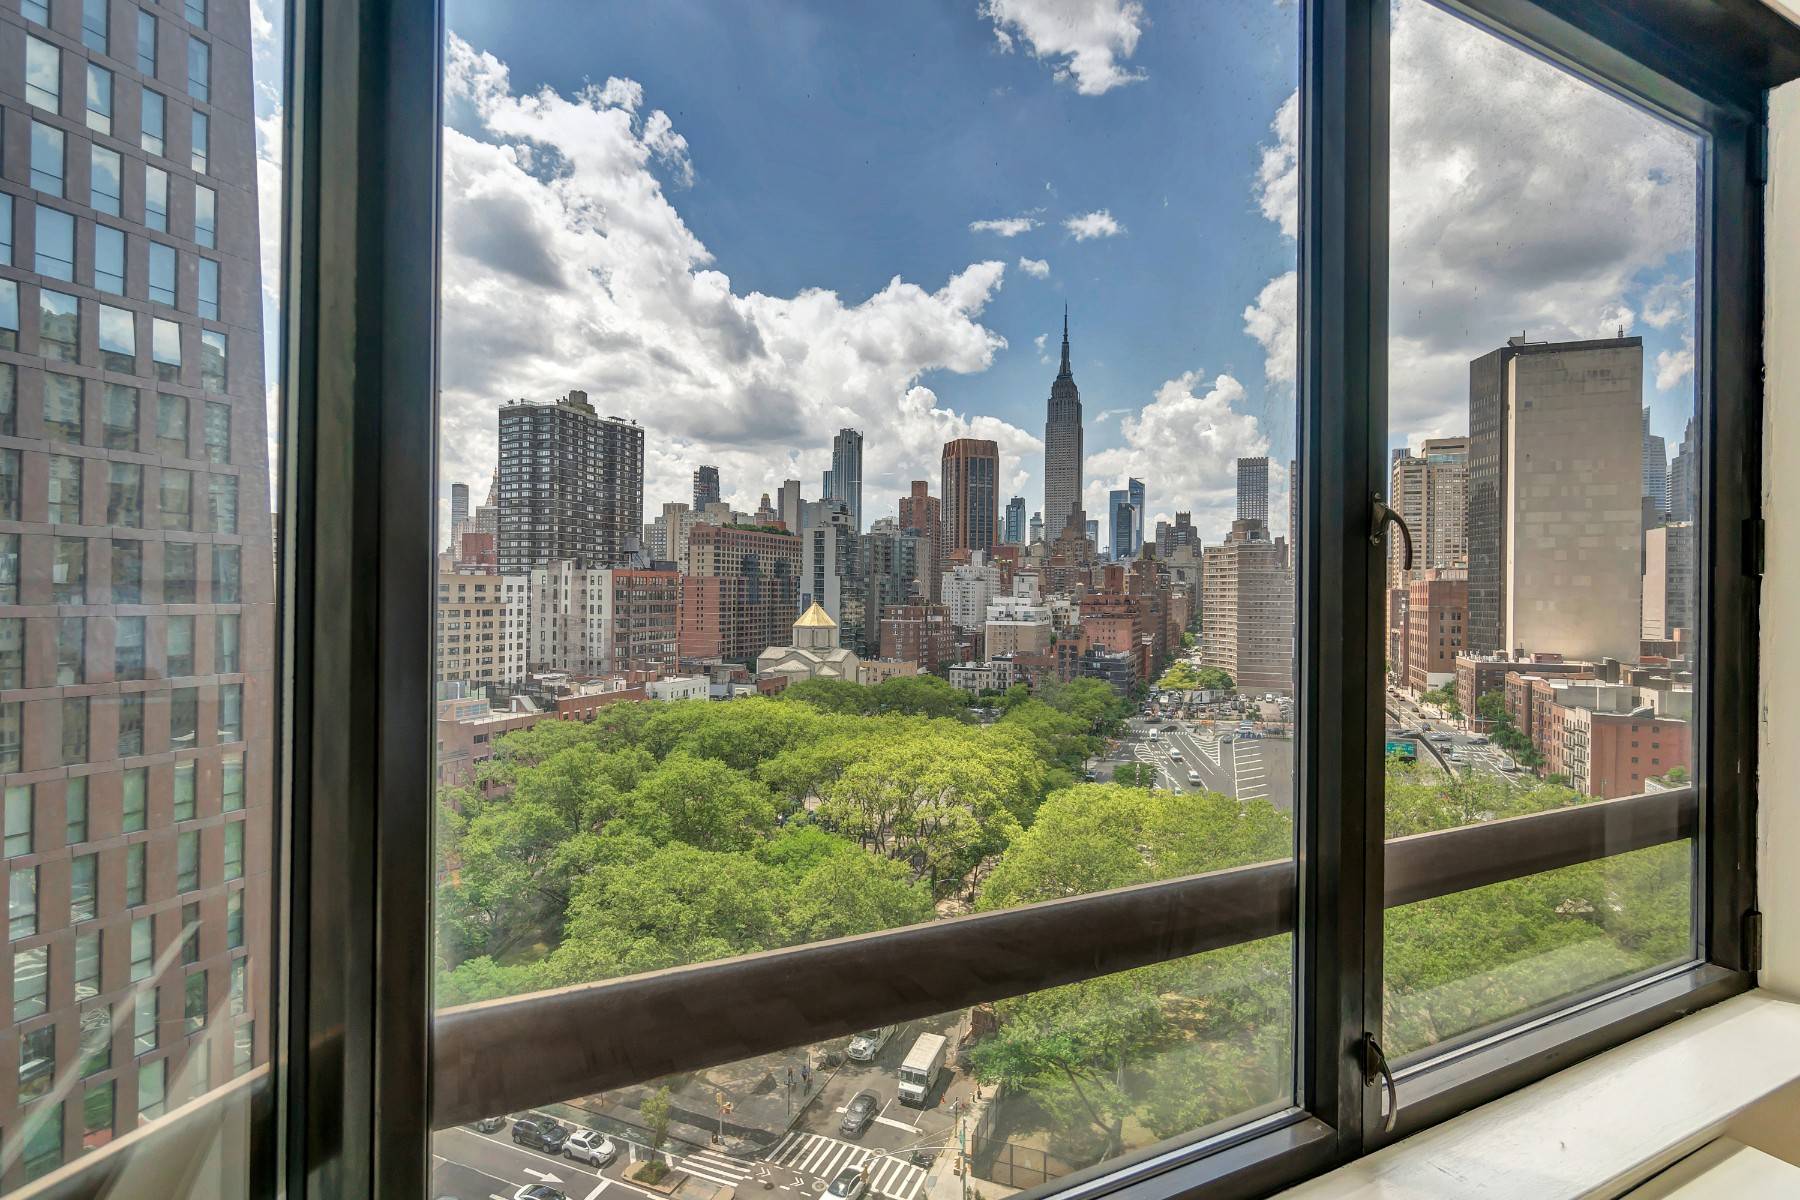 From the moment you step into your new home, you will be mesmerized by the dramatic skyline views of The Empire State Building and Midtown Manhattan.